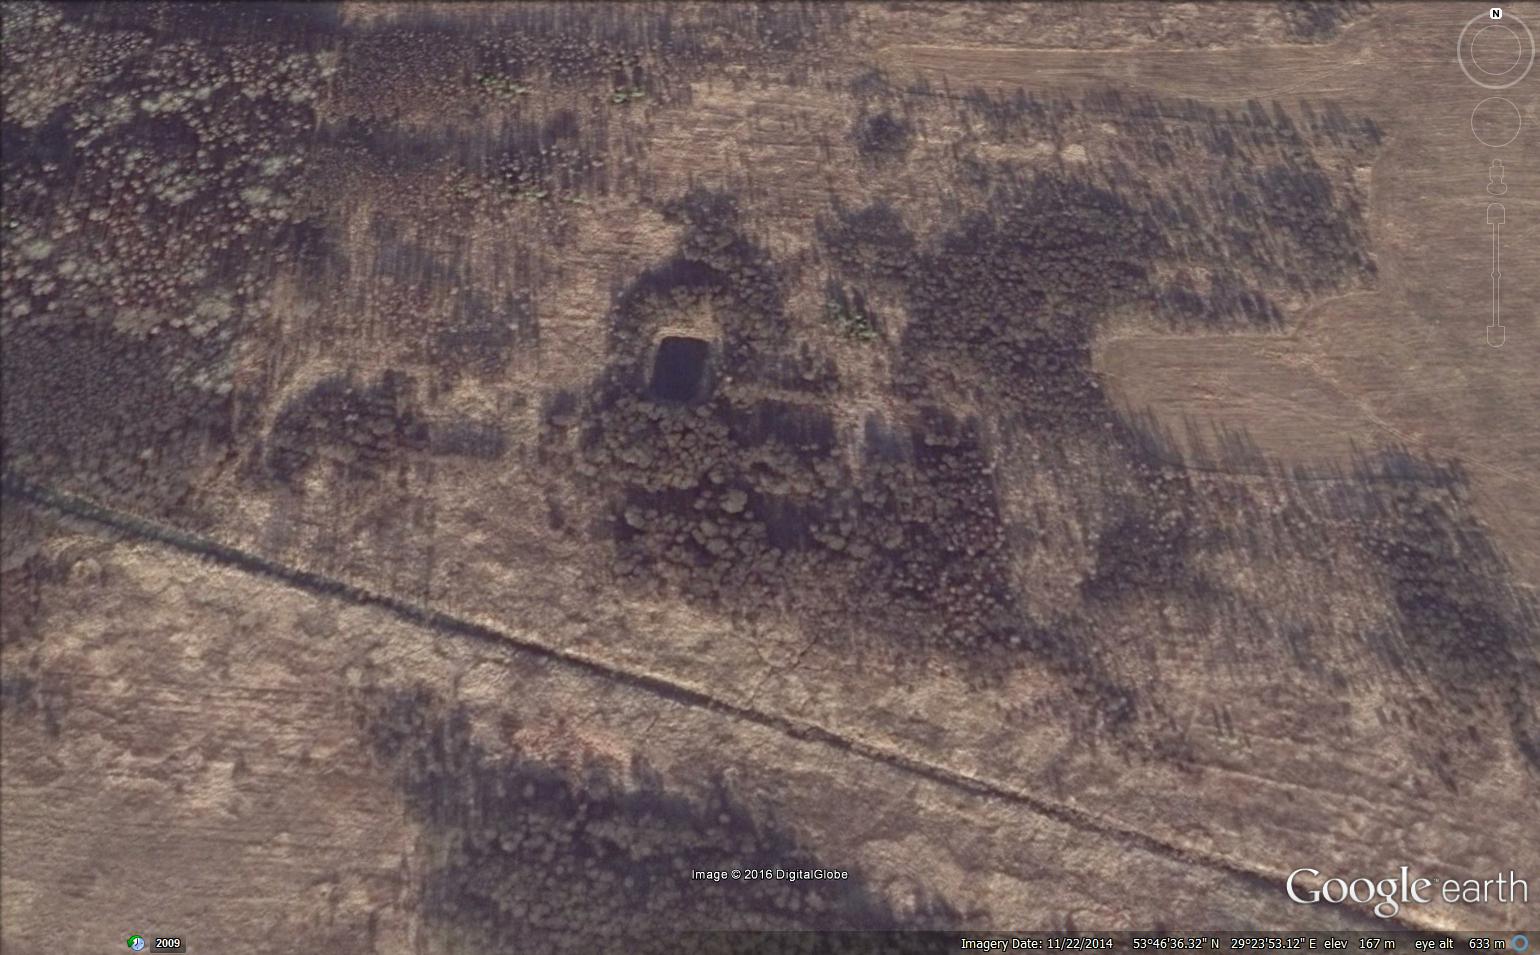 Oldest noble houses ca 1830 / 1850  in  Miezonka were  destroyed  after 1937 and before 1951.  We look at pics of the Google Earth in 2014, November